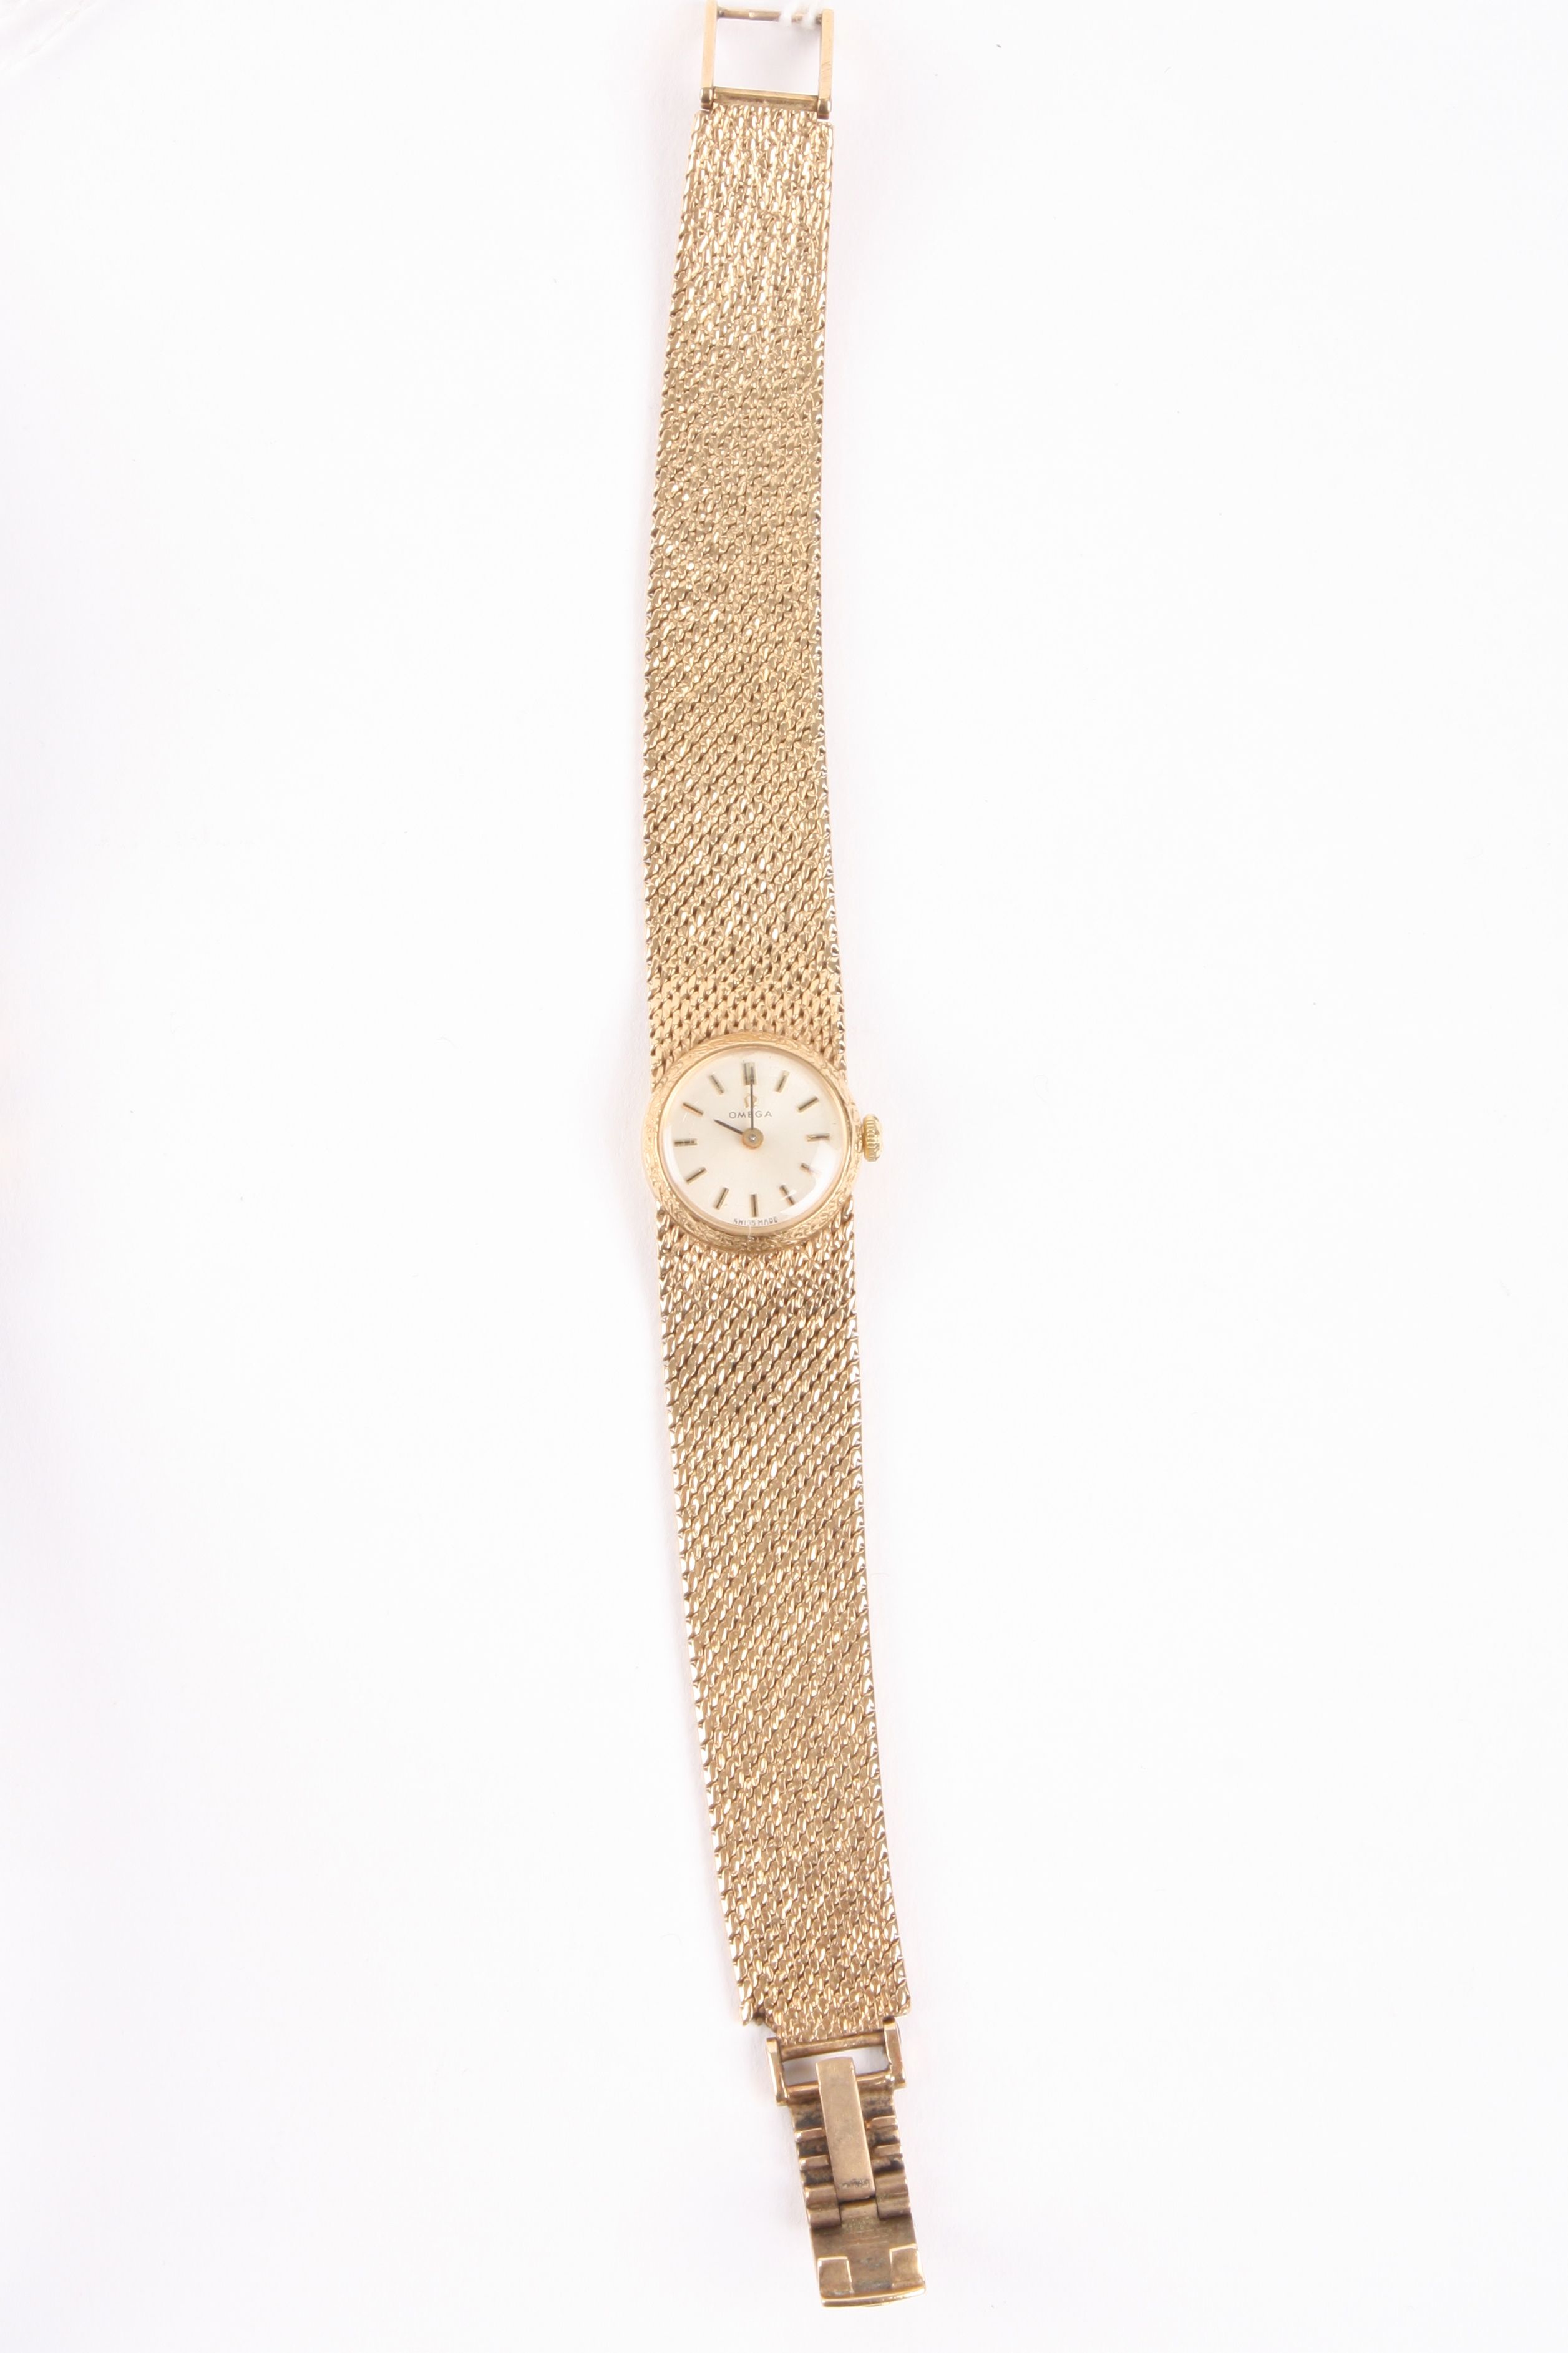 A 9ct gold ladies Omega wrist watch
the circular dial with baton numerals, with a woven gold